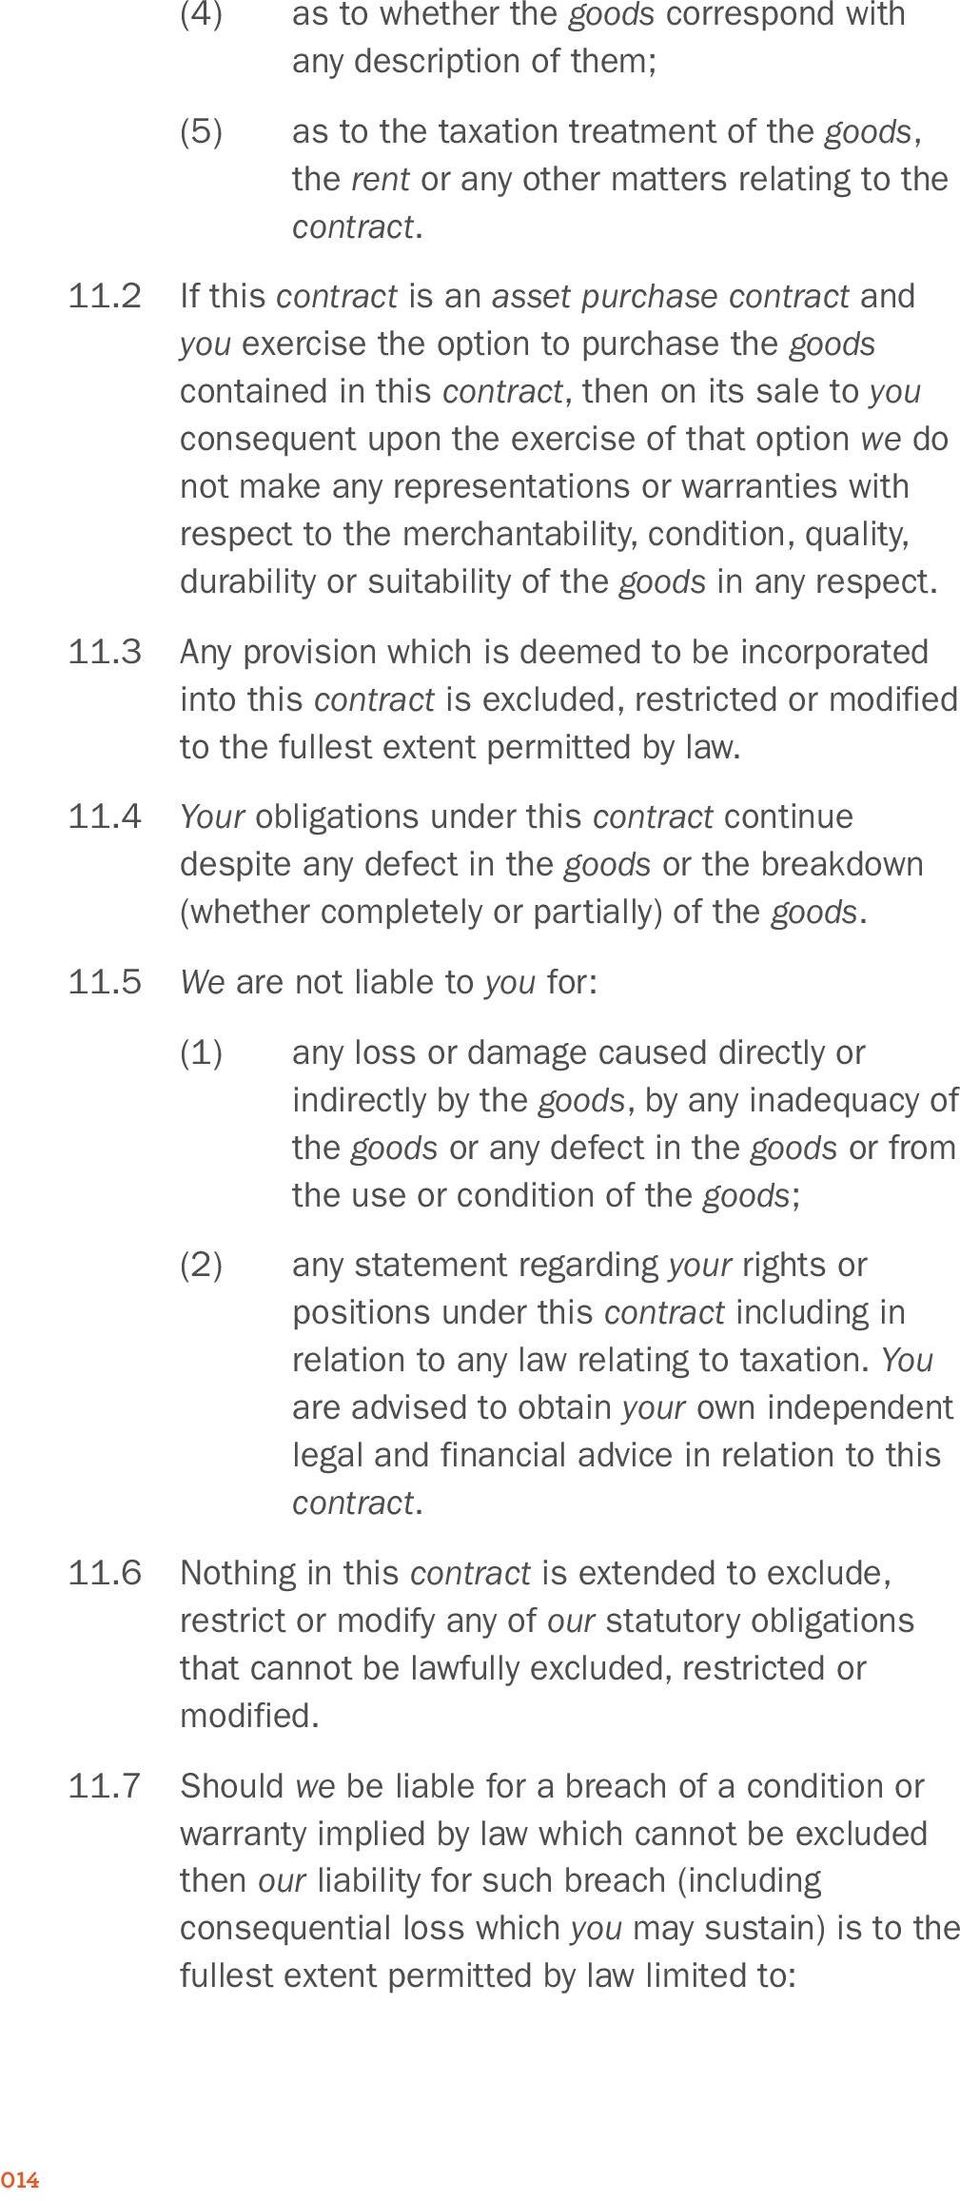 do not make any representations or warranties with respect to the merchantability, condition, quality, durability or suitability of the goods in any respect. 11.